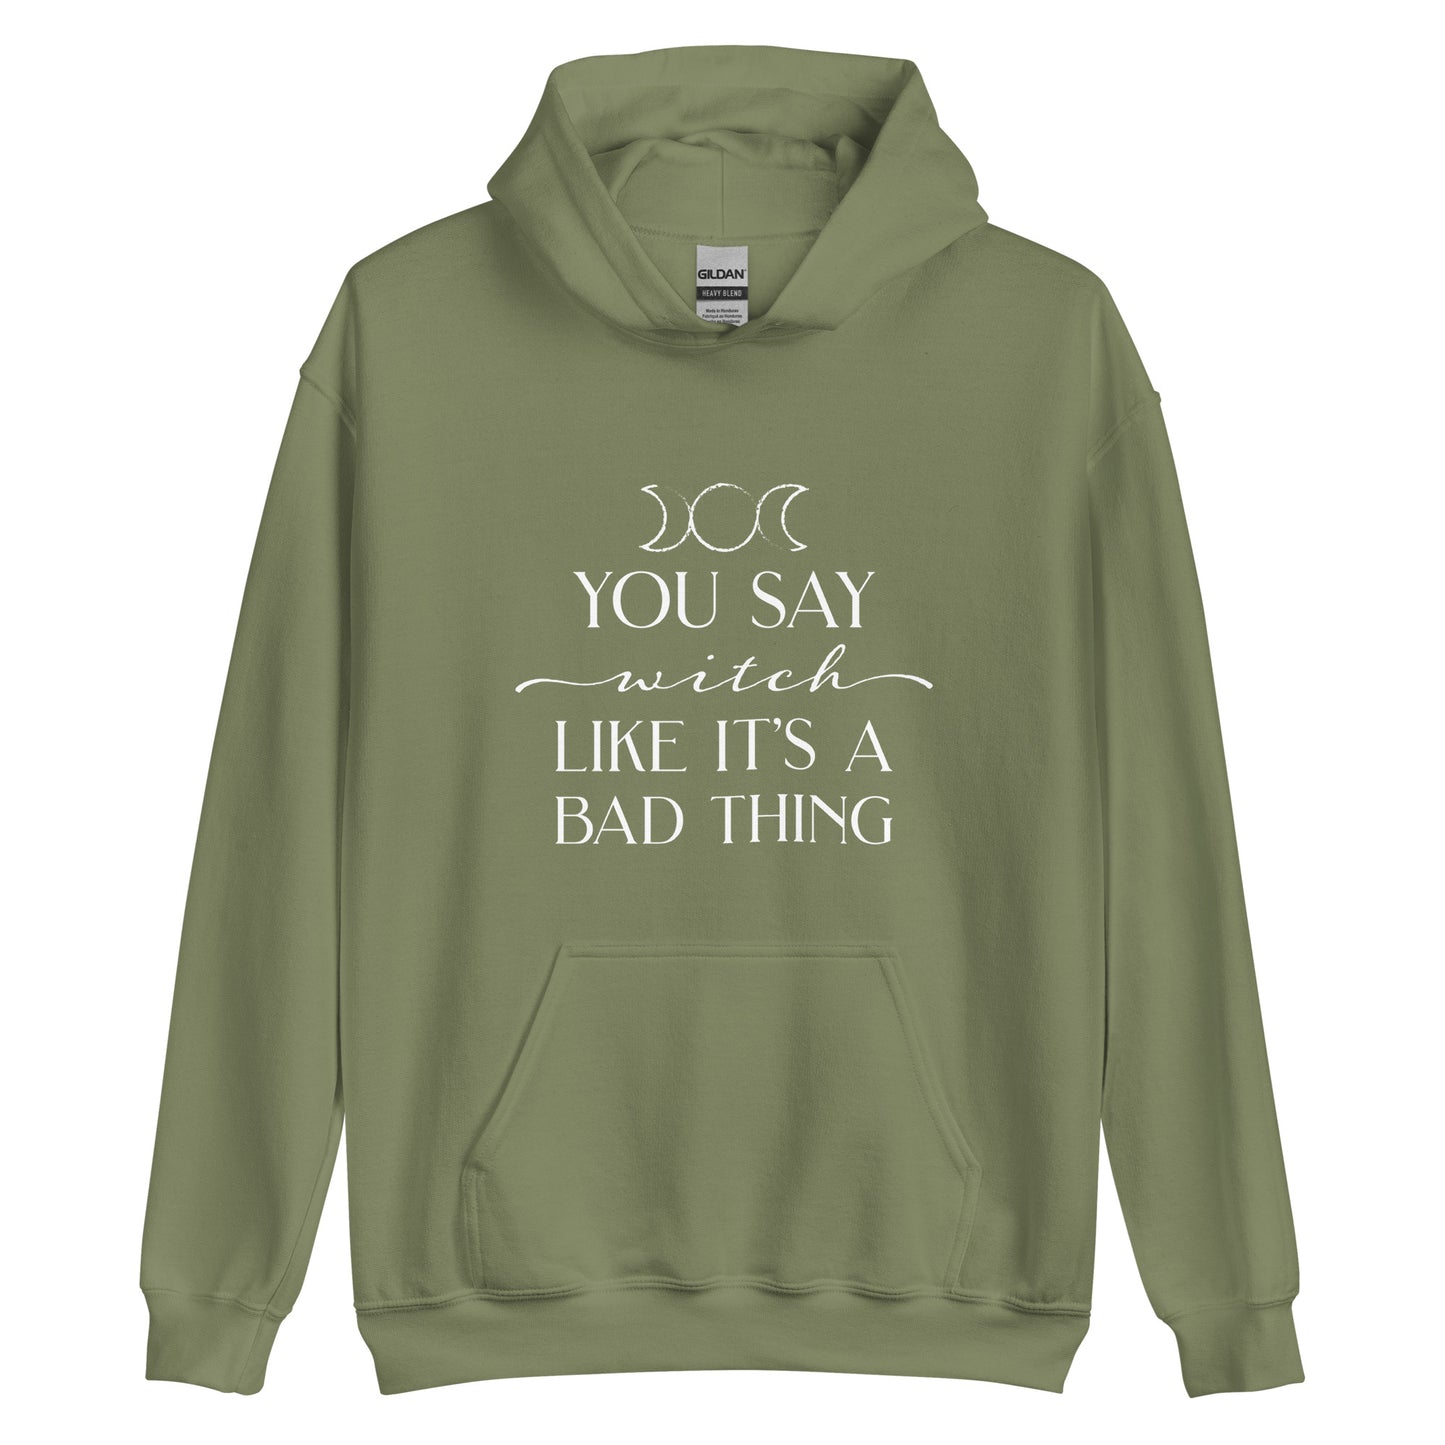 An olive green hooded sweatshirt featuring the triple goddess symbol and text reading "You say witch like it's a bad thing"